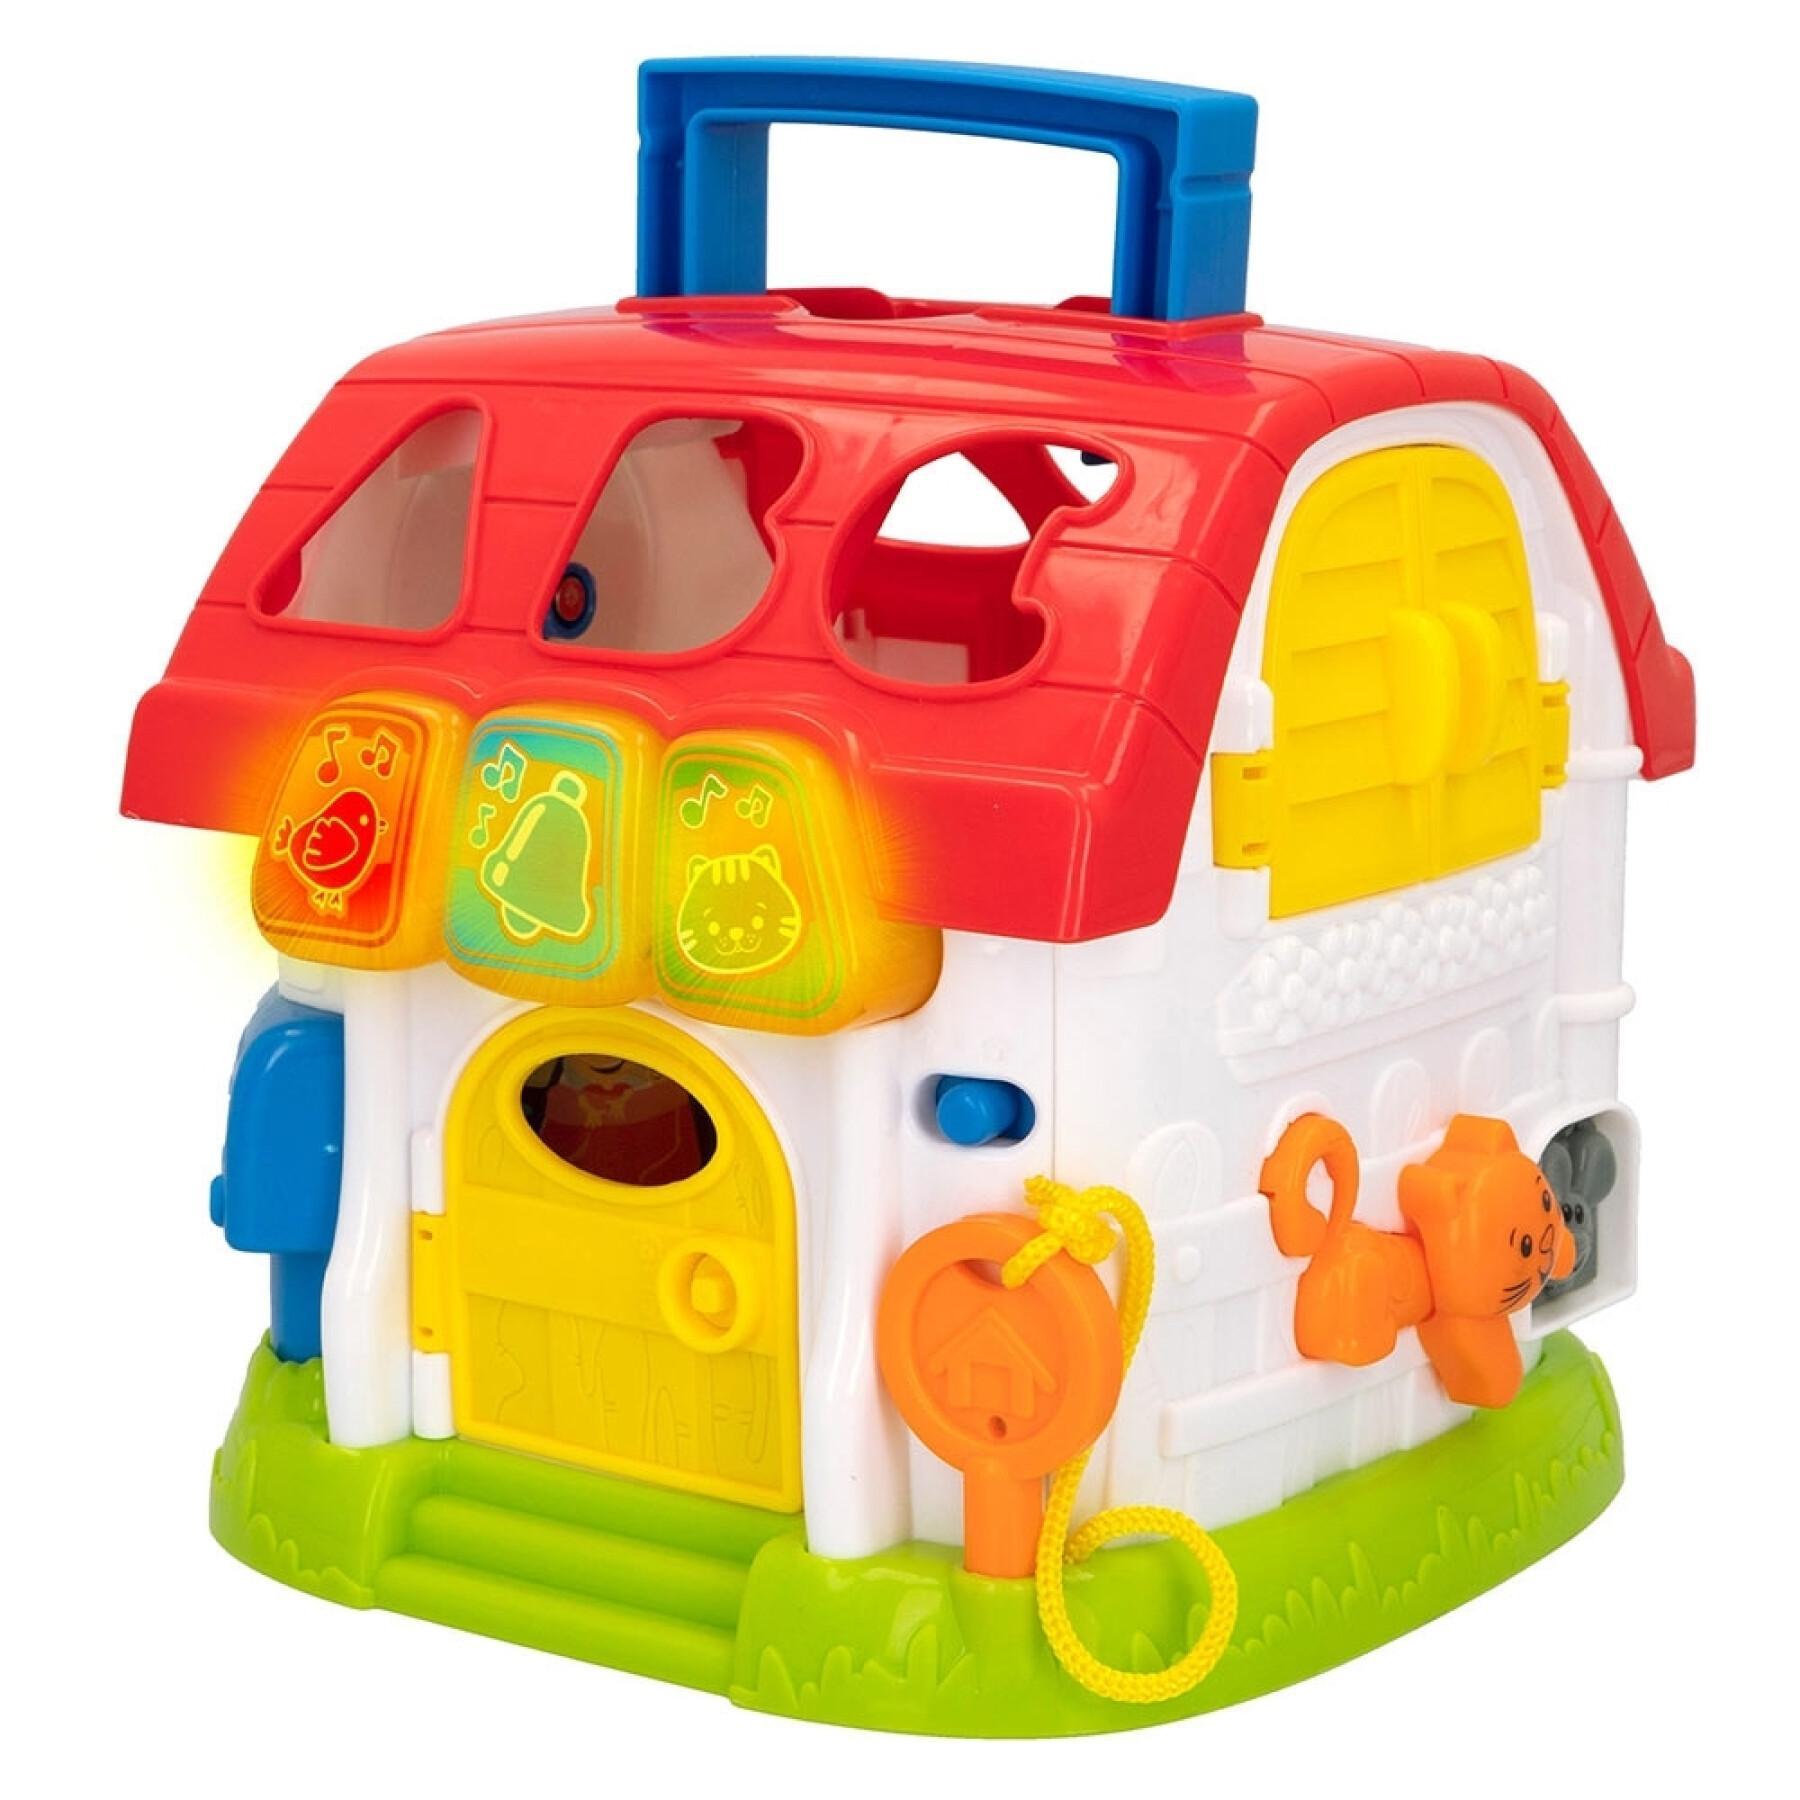 House activity light, sounds and melodies Winfun